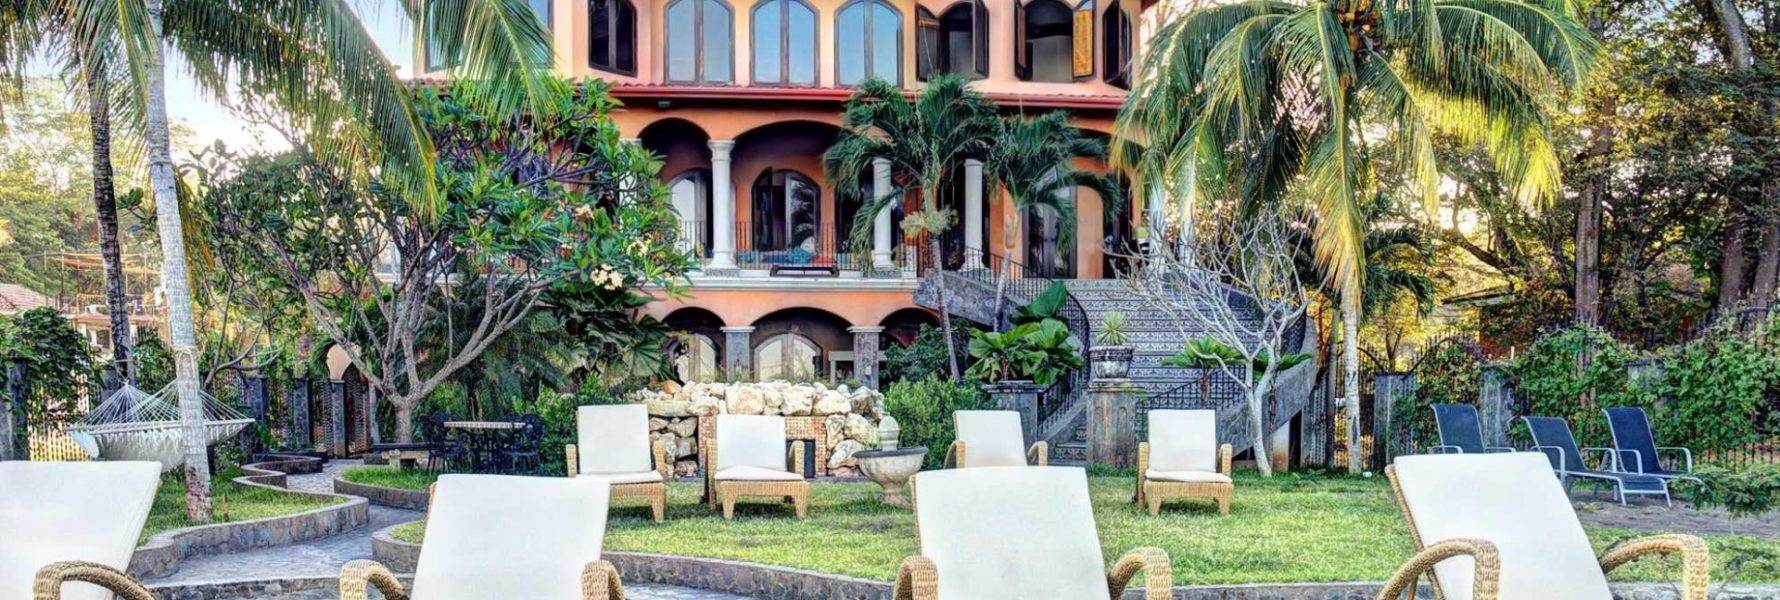 Three story rental home with bedding for 24 people on Playa Potrero, Guanacaste.  This Villa has eight chaise lounge chairs, hammock, and additional outdoor seating in a gorgeous tropical setting directly on the beach.